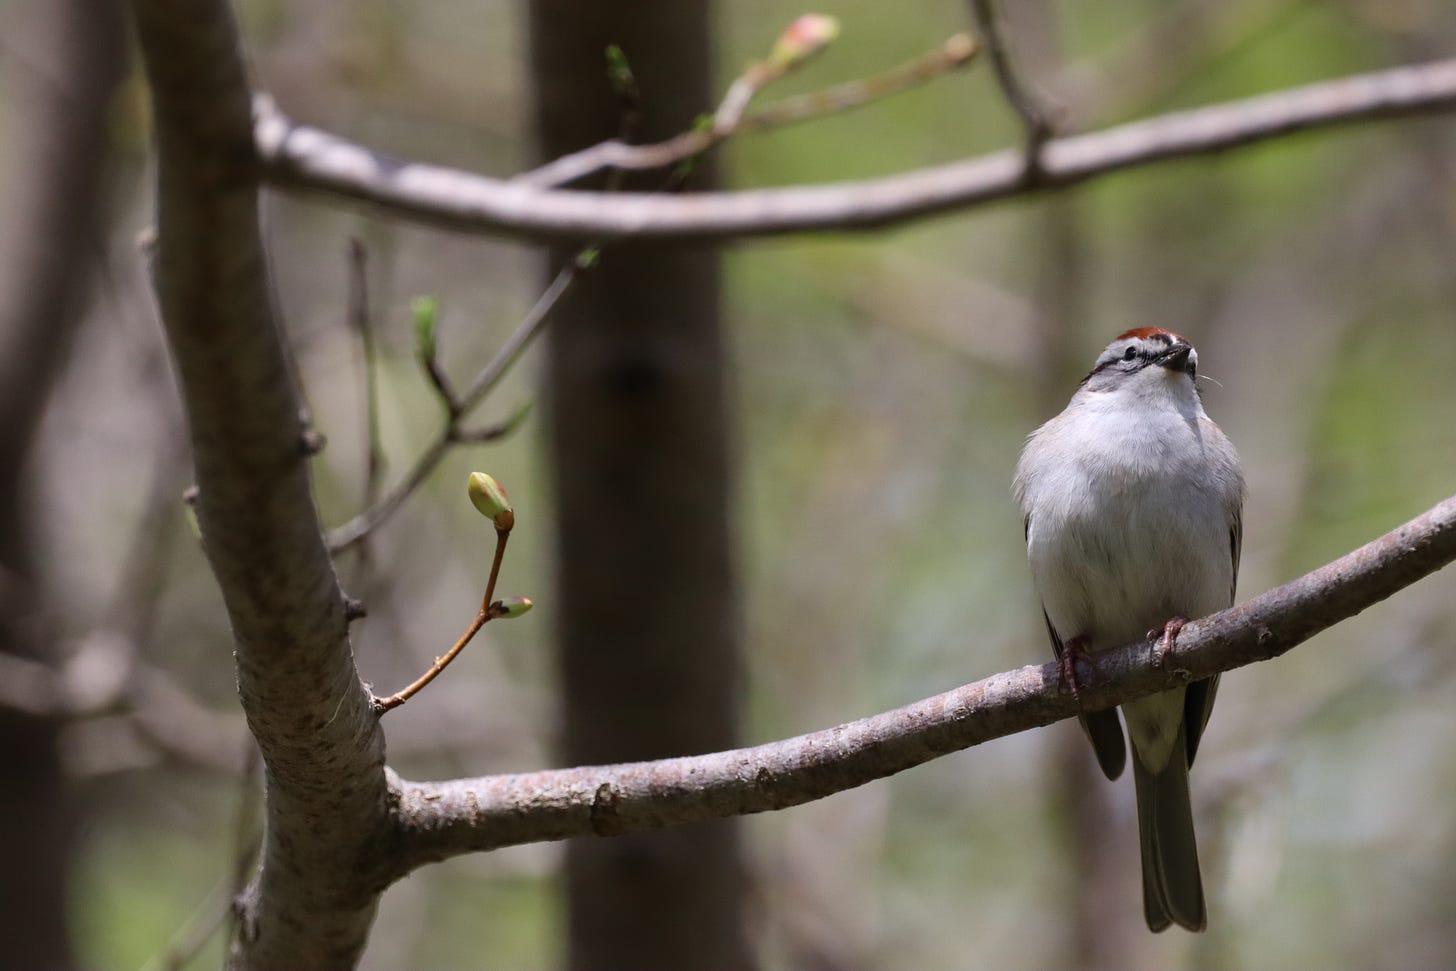 a chipping sparrow (small sparrow with a rusty cap) sits on a branch of a tree